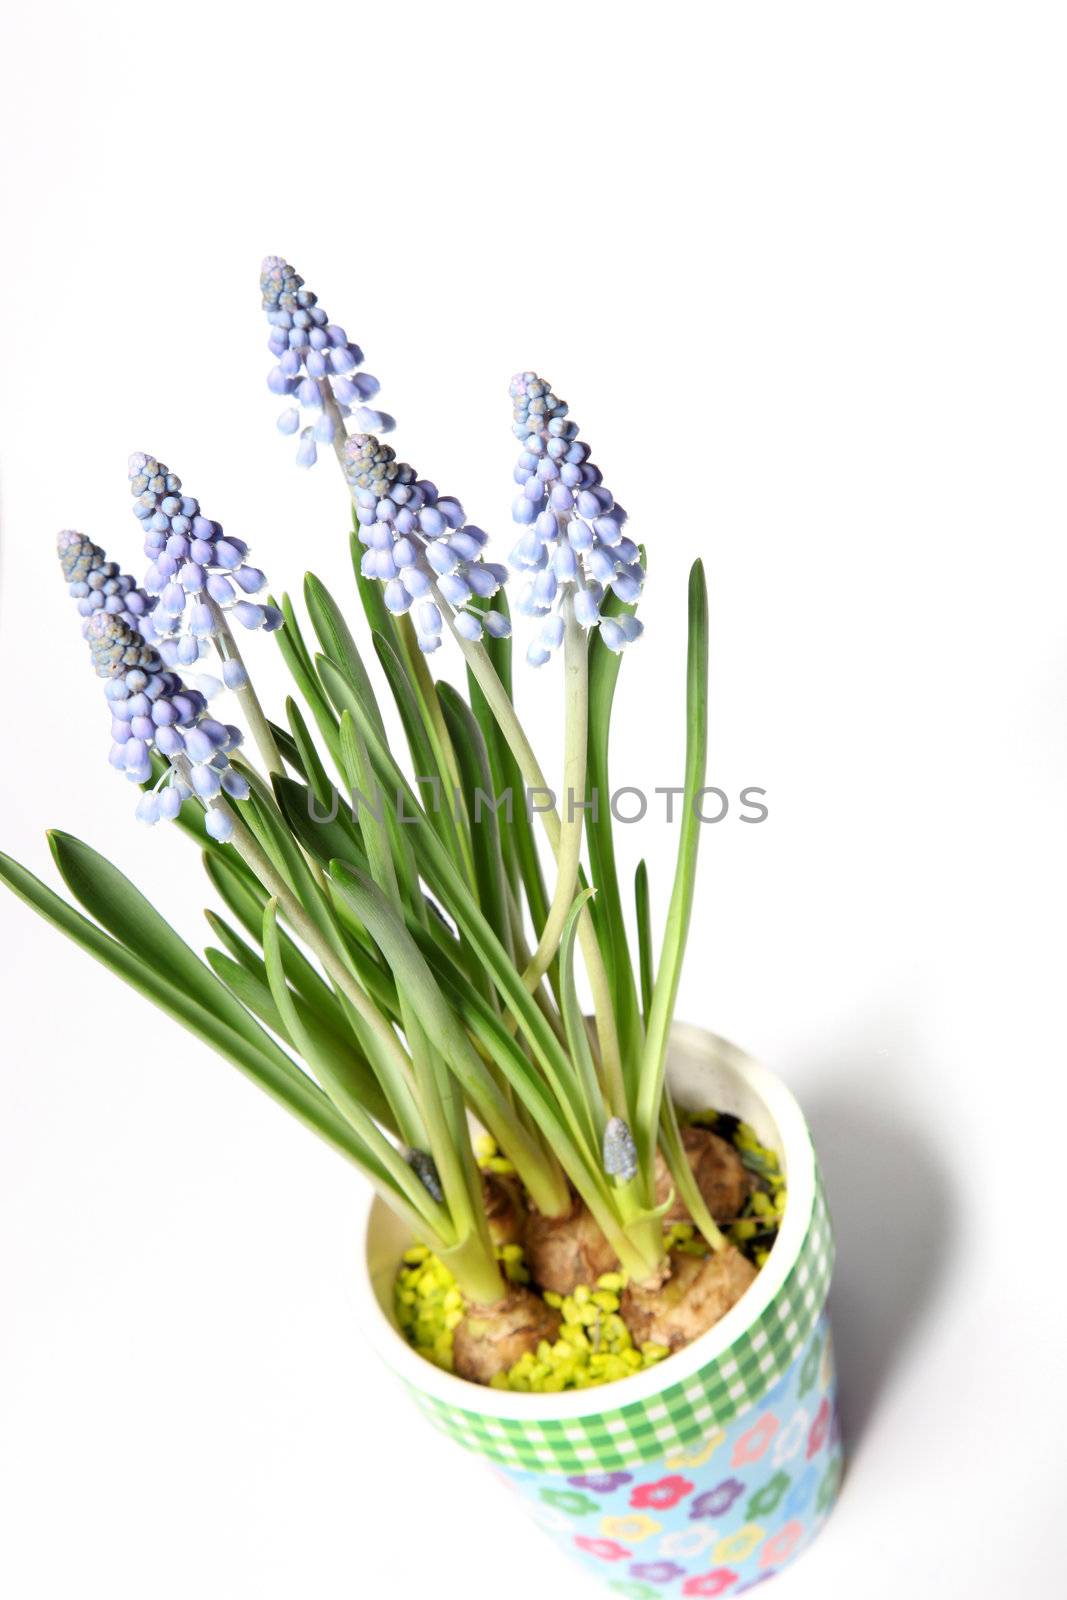 Lavender in a colorful pot from above by Farina6000